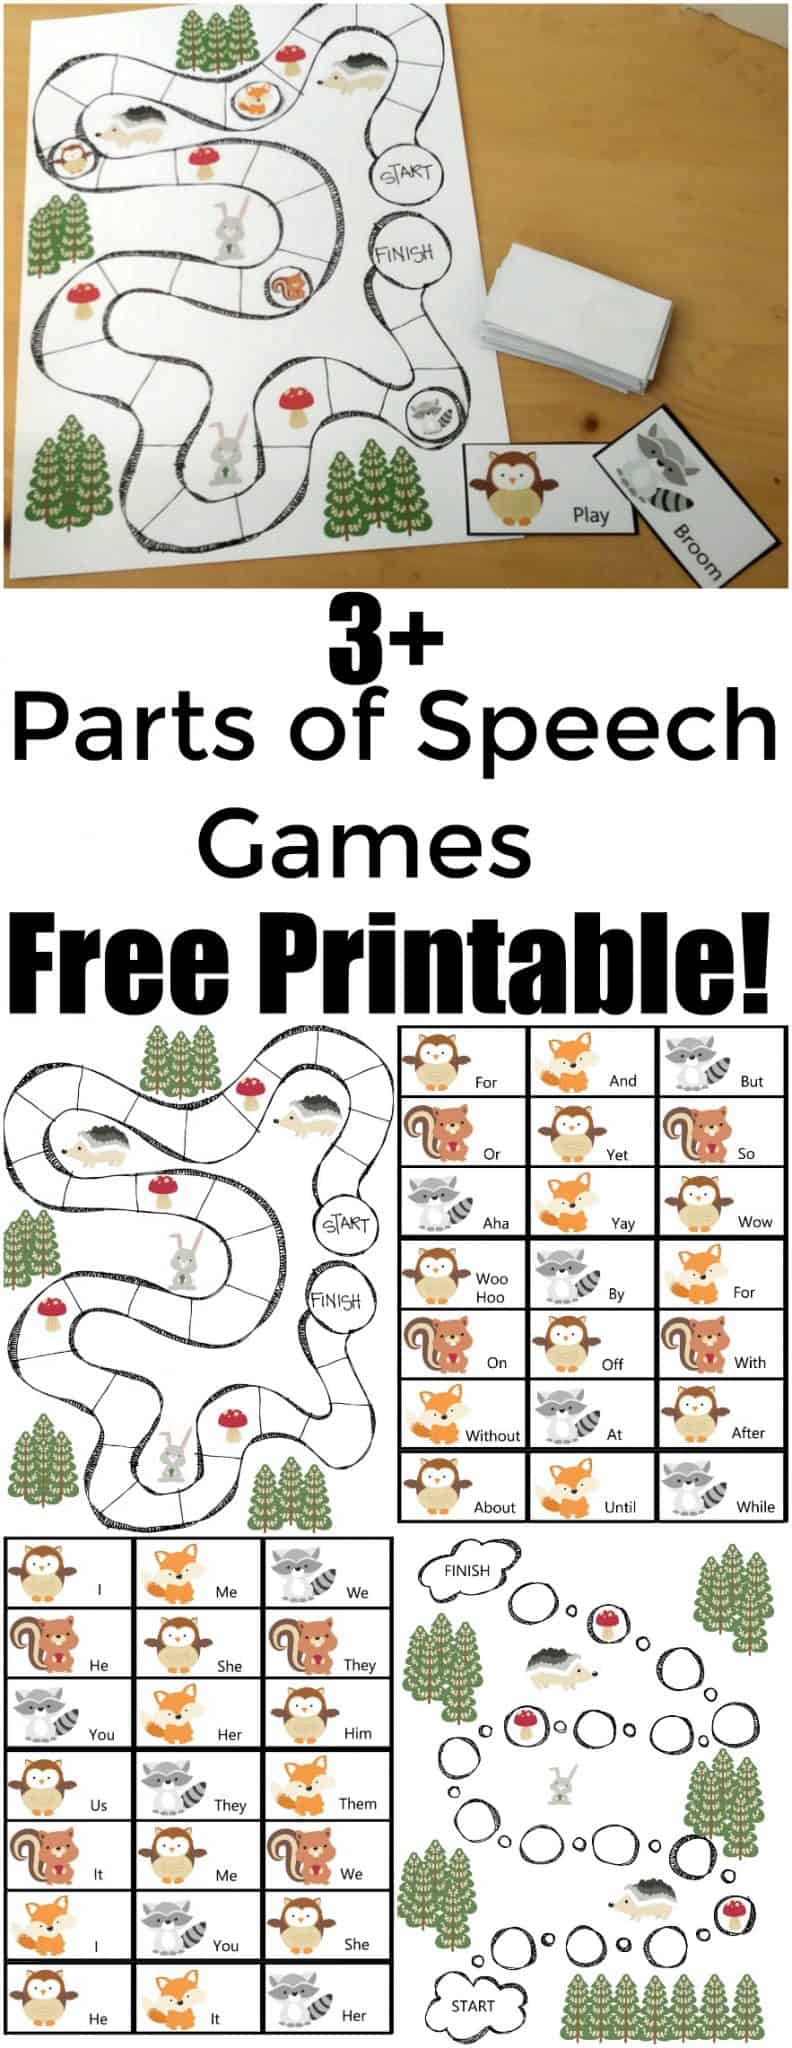 Parts of Speech Game - More than 3 Parts of speech games in this Free Printable pack - #freeprintable #education #homeschool #printable #printablegame #grammar #learning #teach 